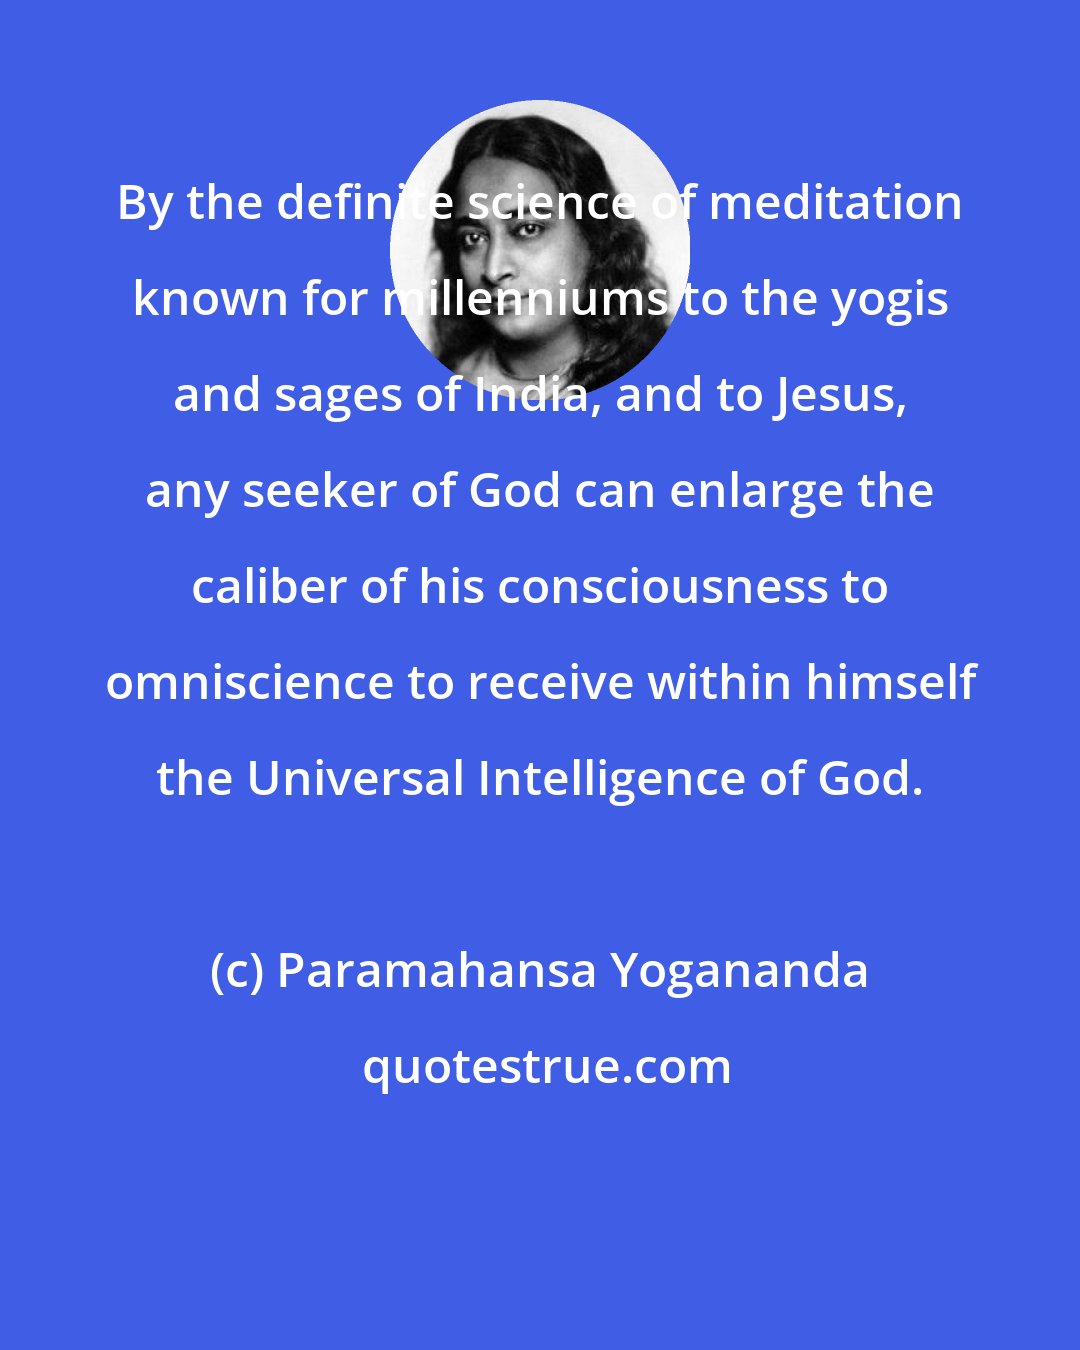 Paramahansa Yogananda: By the definite science of meditation known for millenniums to the yogis and sages of India, and to Jesus, any seeker of God can enlarge the caliber of his consciousness to omniscience to receive within himself the Universal Intelligence of God.